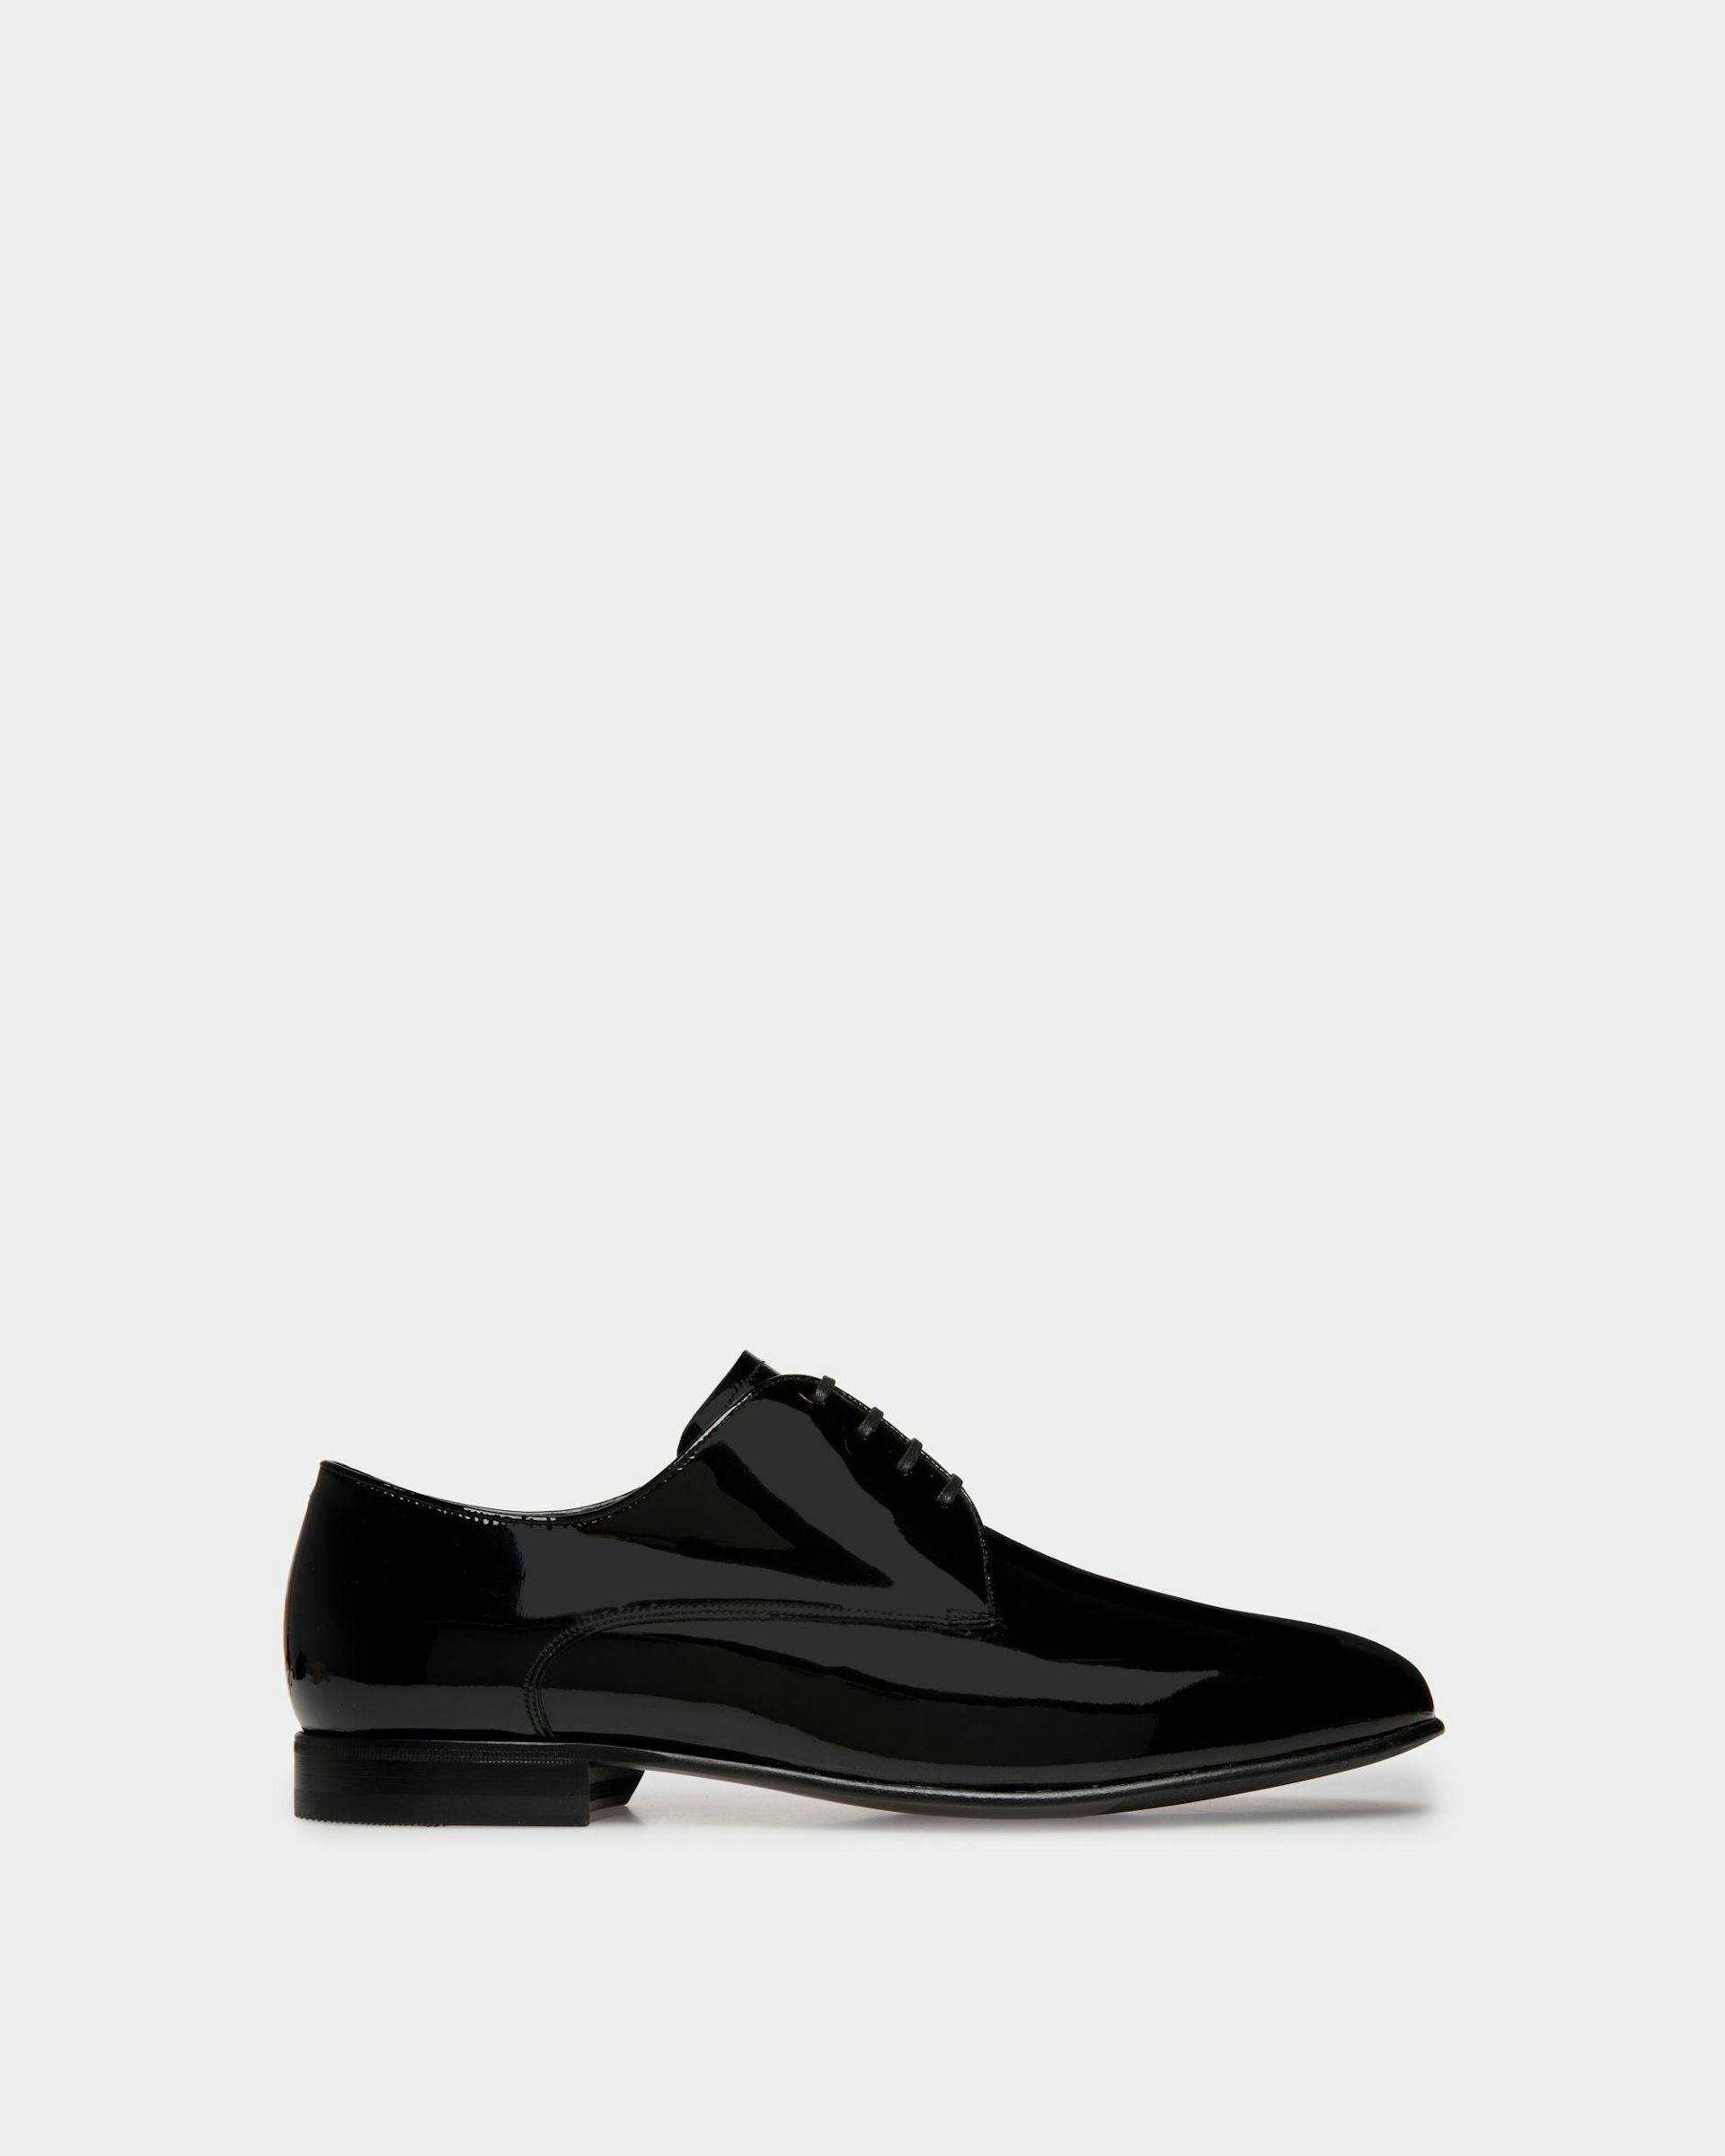 Suisse Derby in Black Patent Leather - Men's - Bally - 01